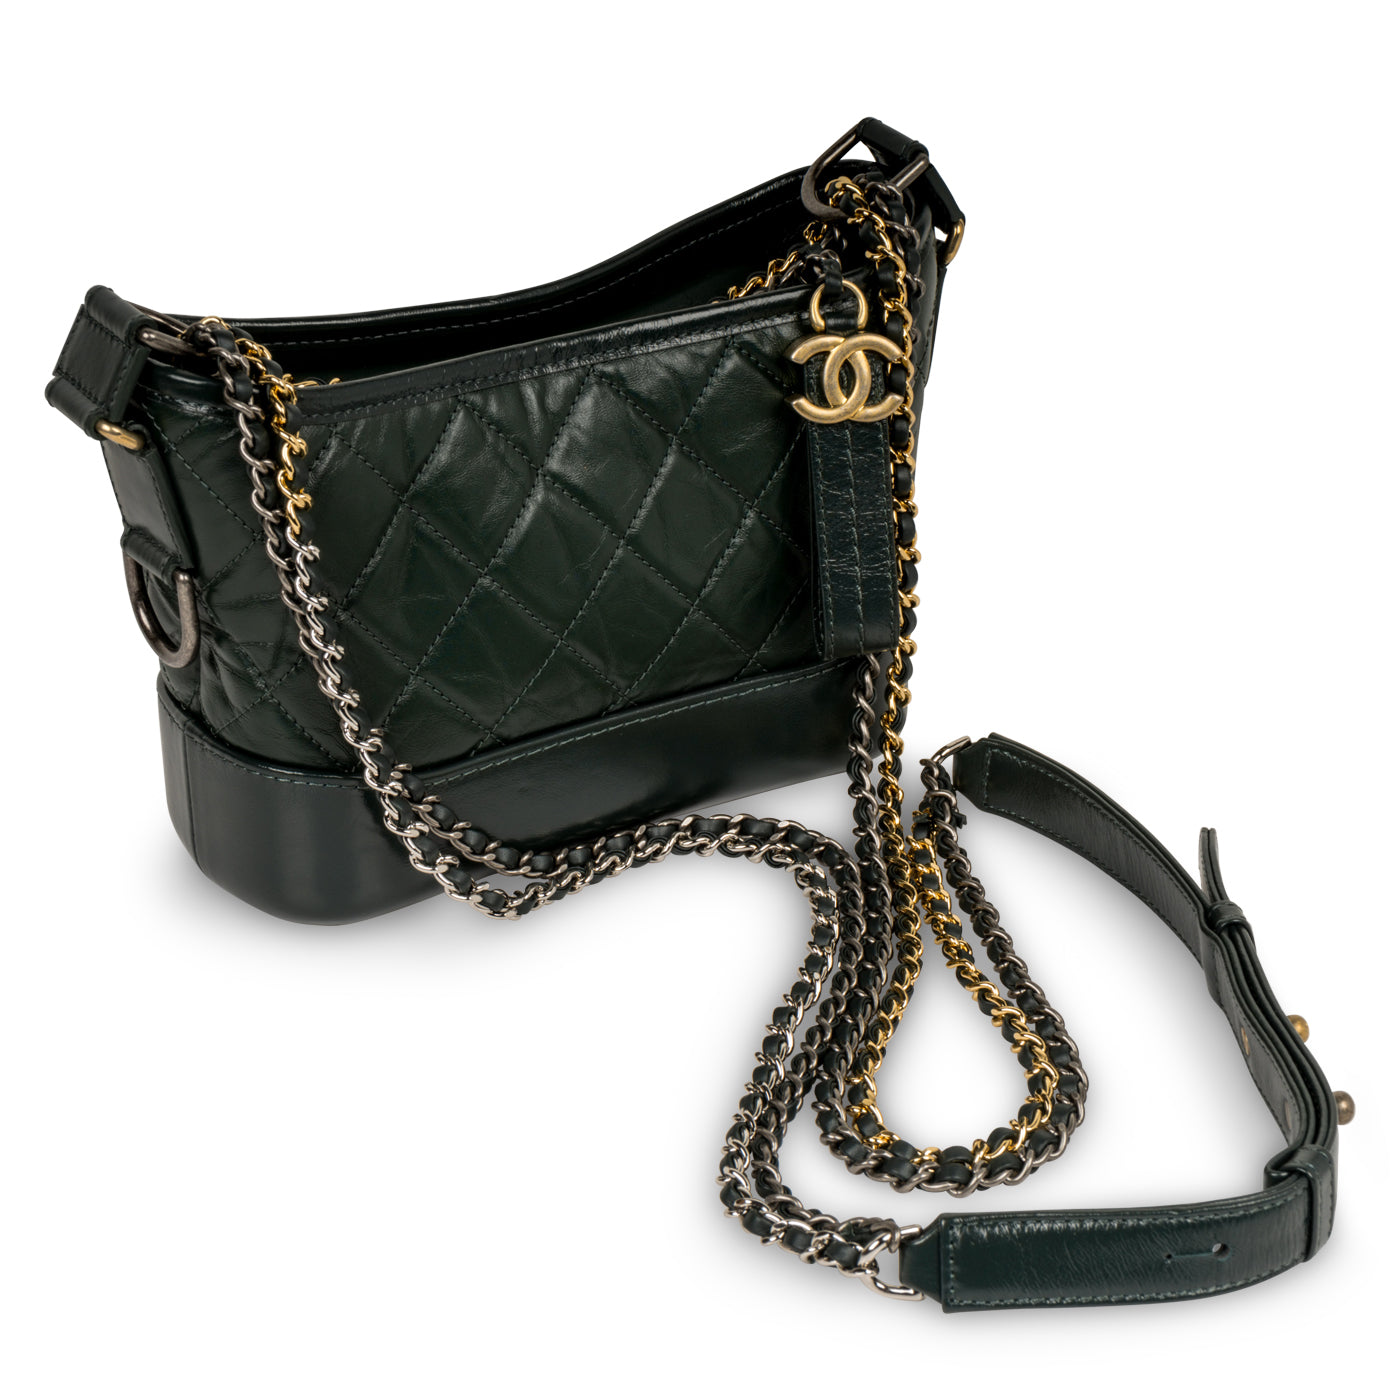 Chanel - Gabrielle Small - Green - New